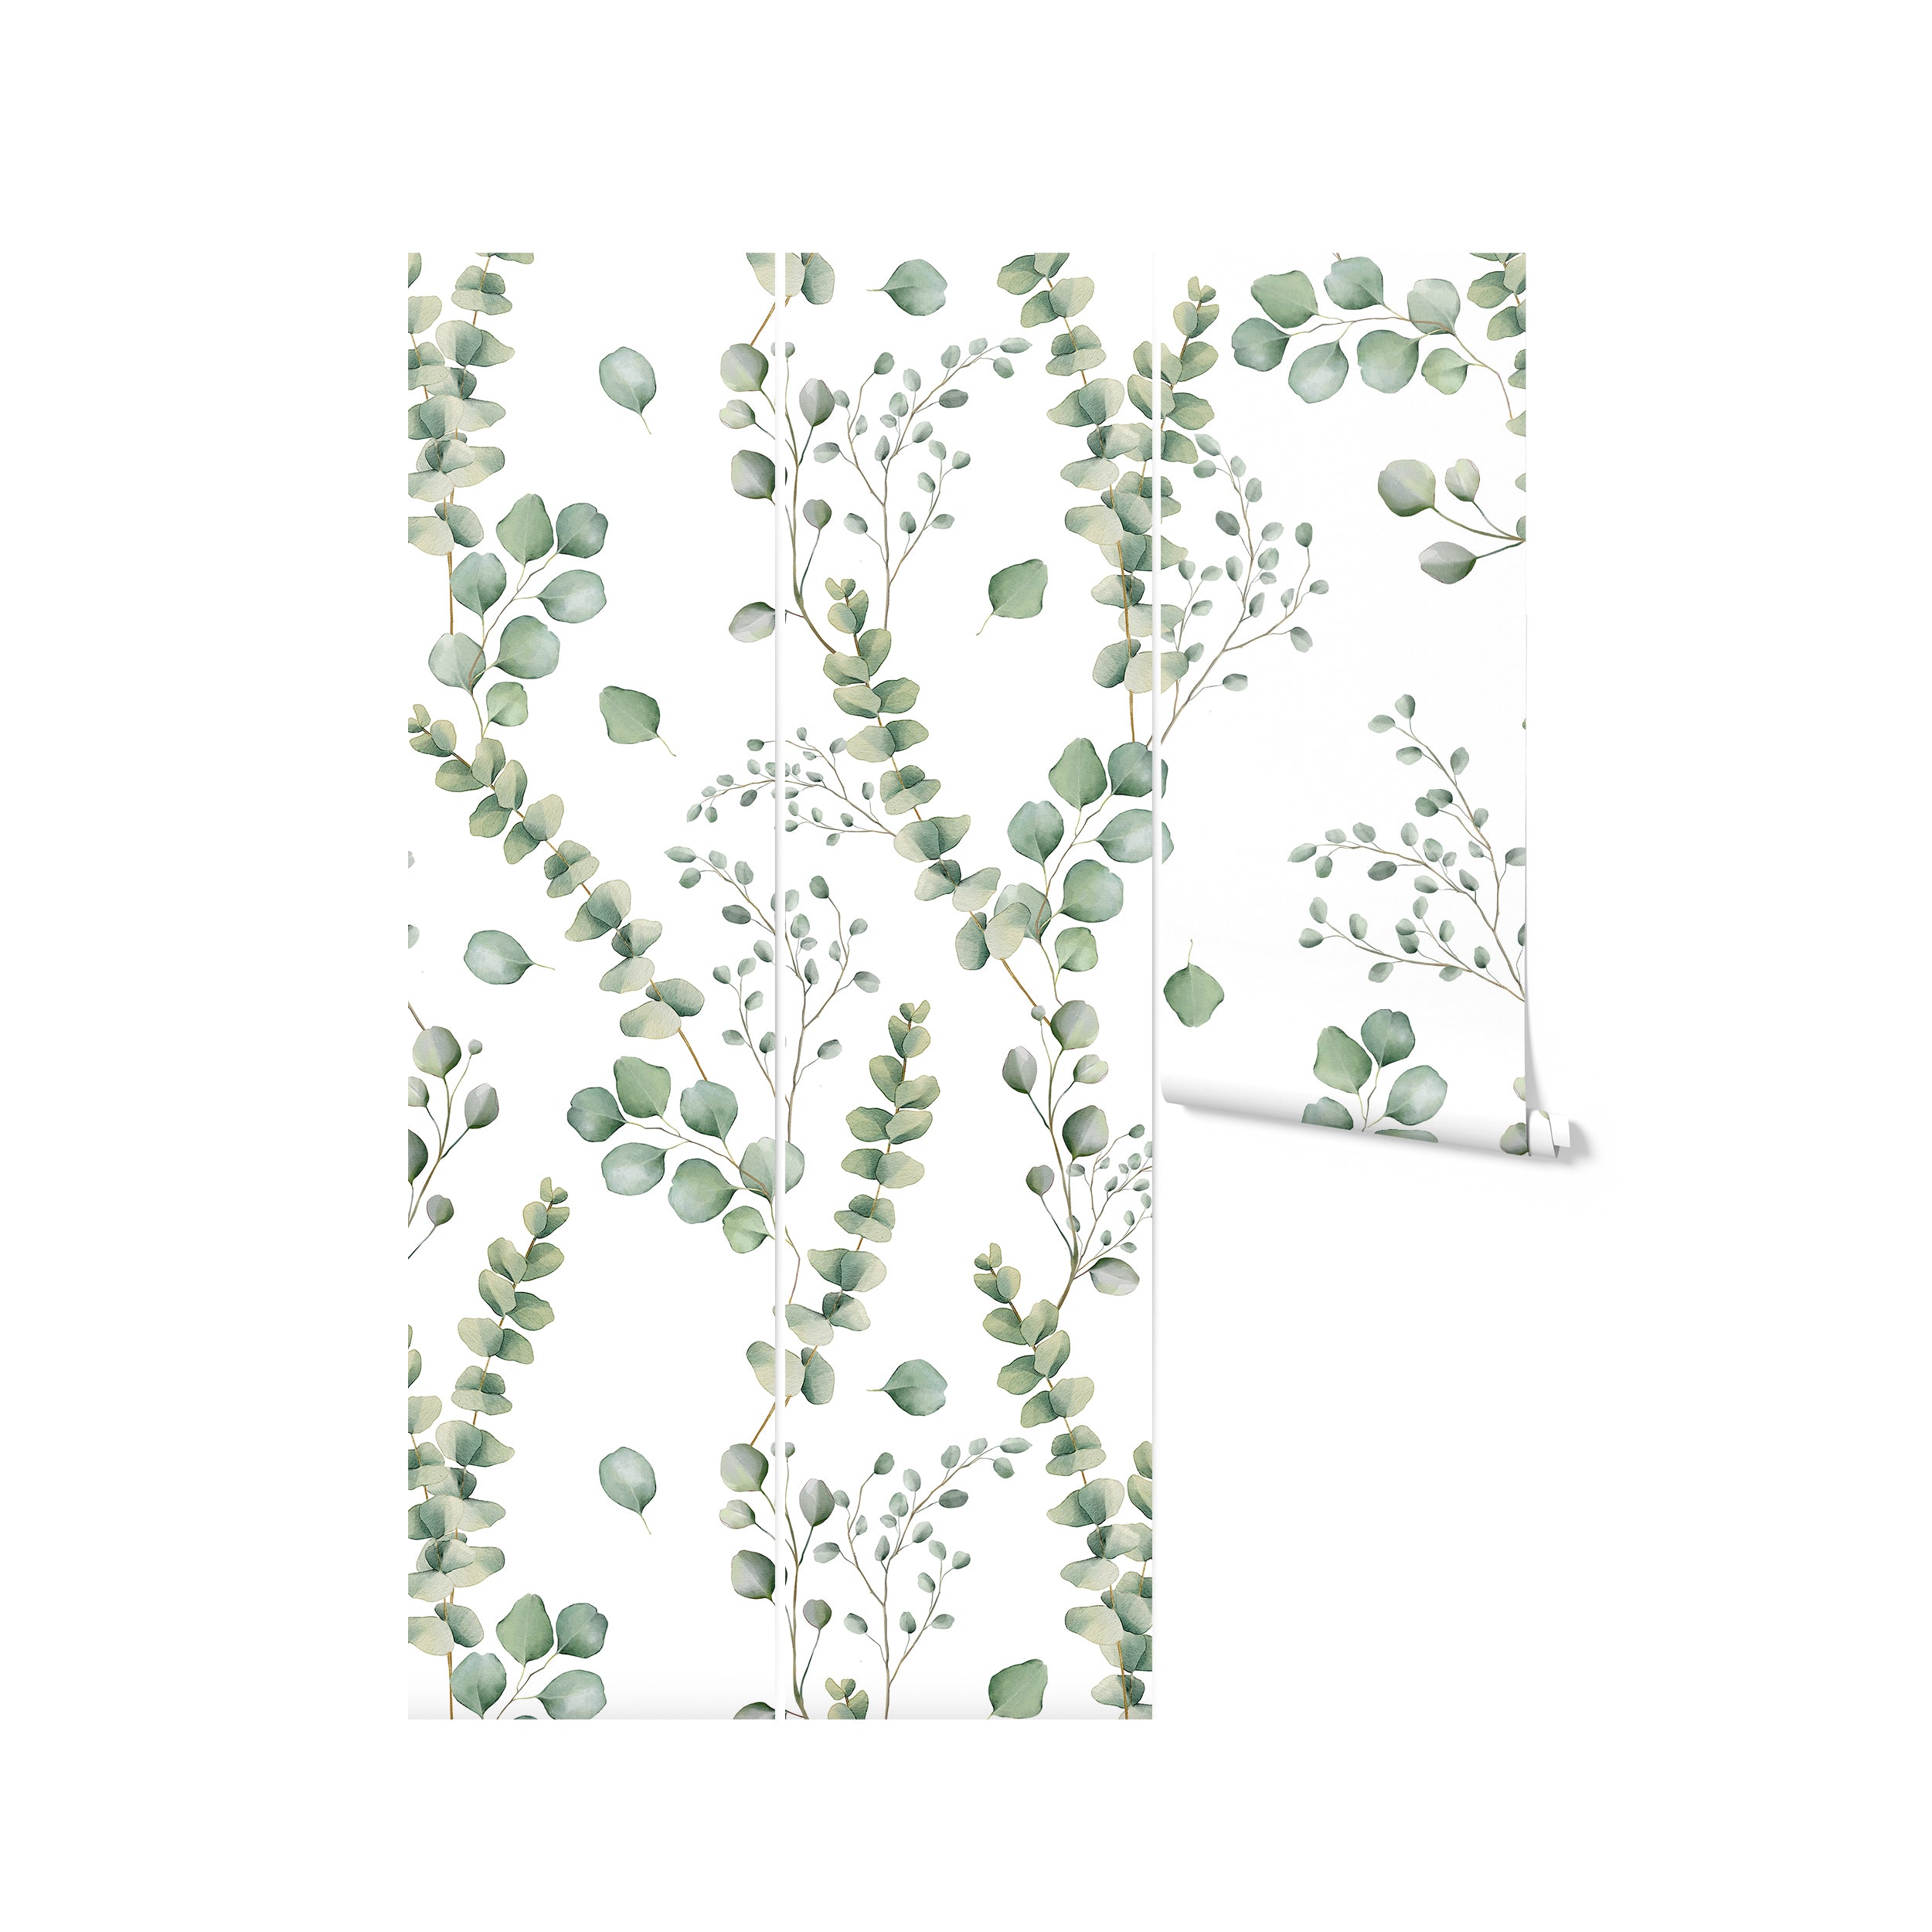 A seamless pattern of eucalyptus branches with round, green leaves spread out over a white background, giving a tranquil and natural feel, suitable for a fresh interior decor theme